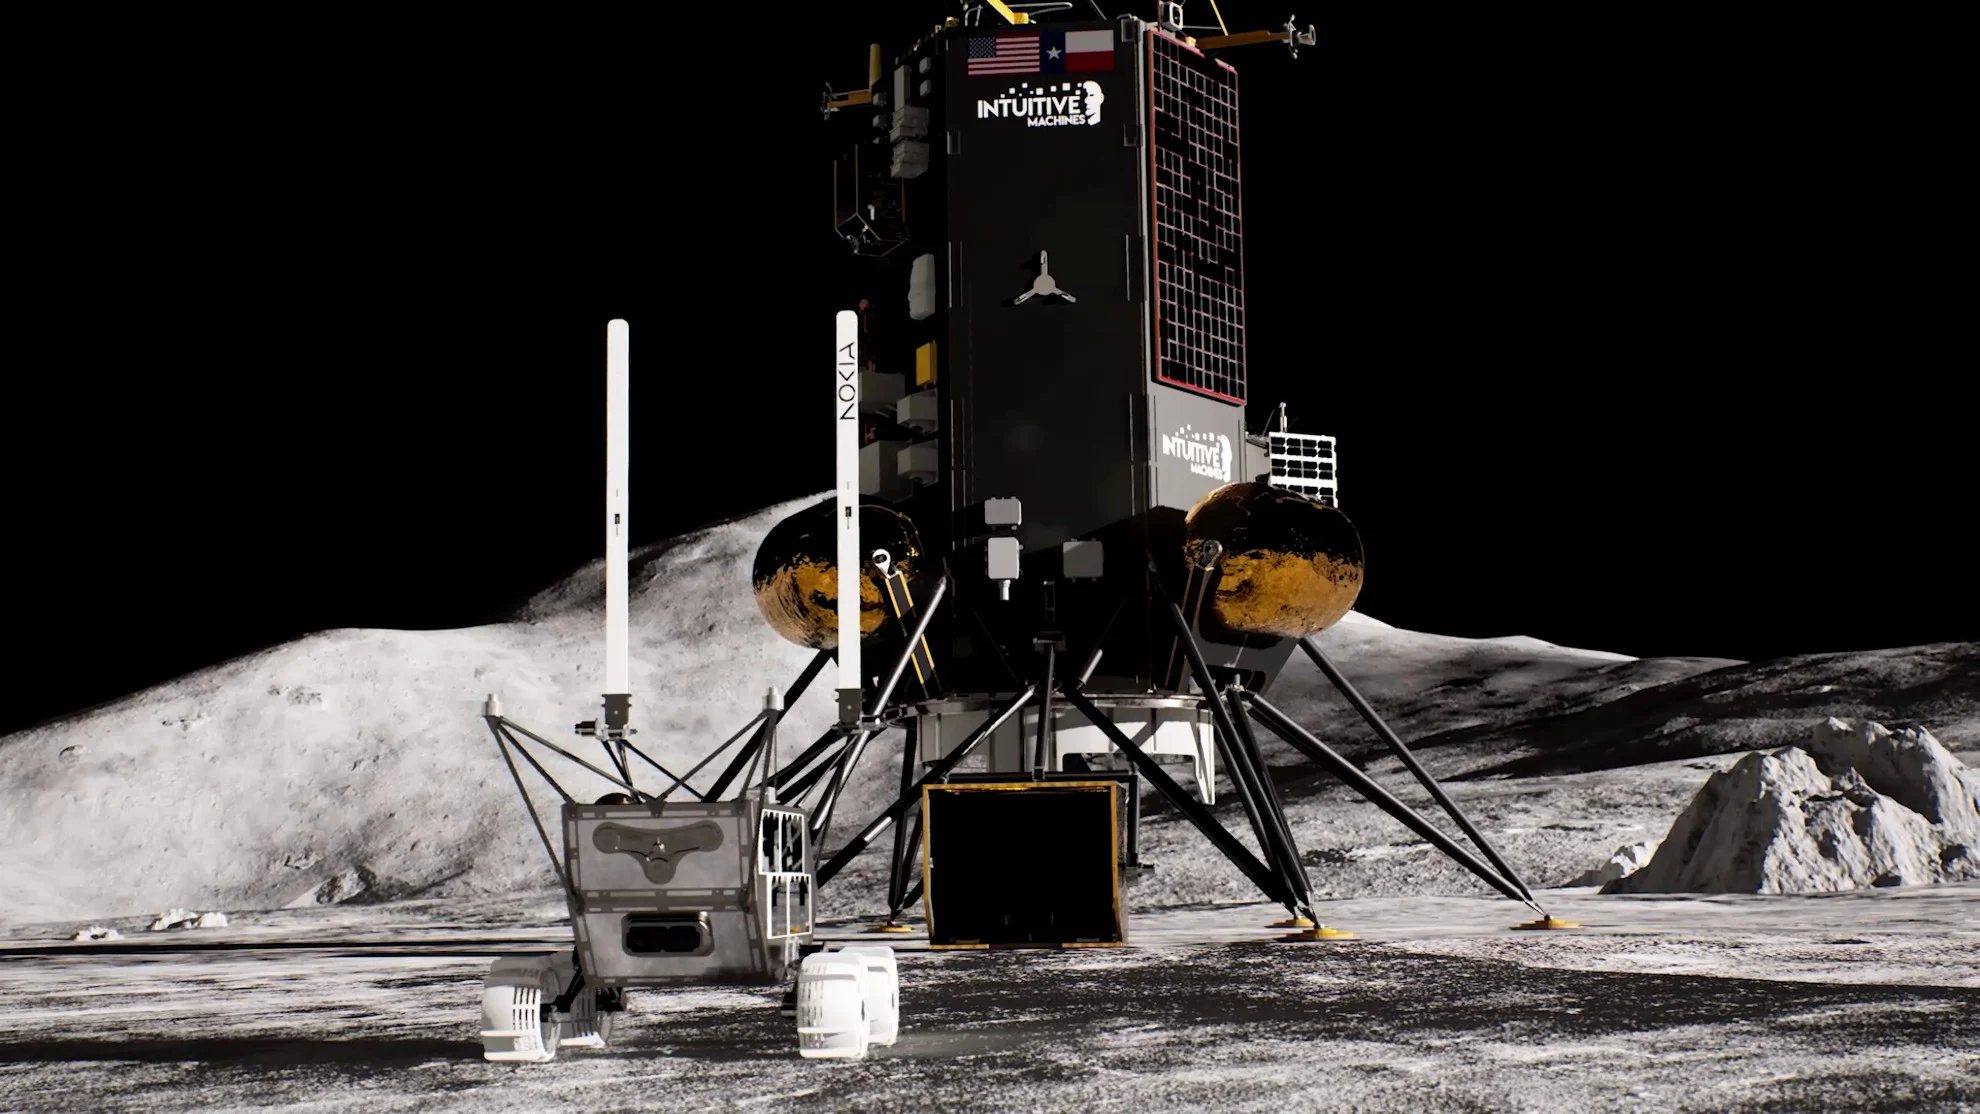 Nokia plans to set up the first 4G cell network on the Moon later this year